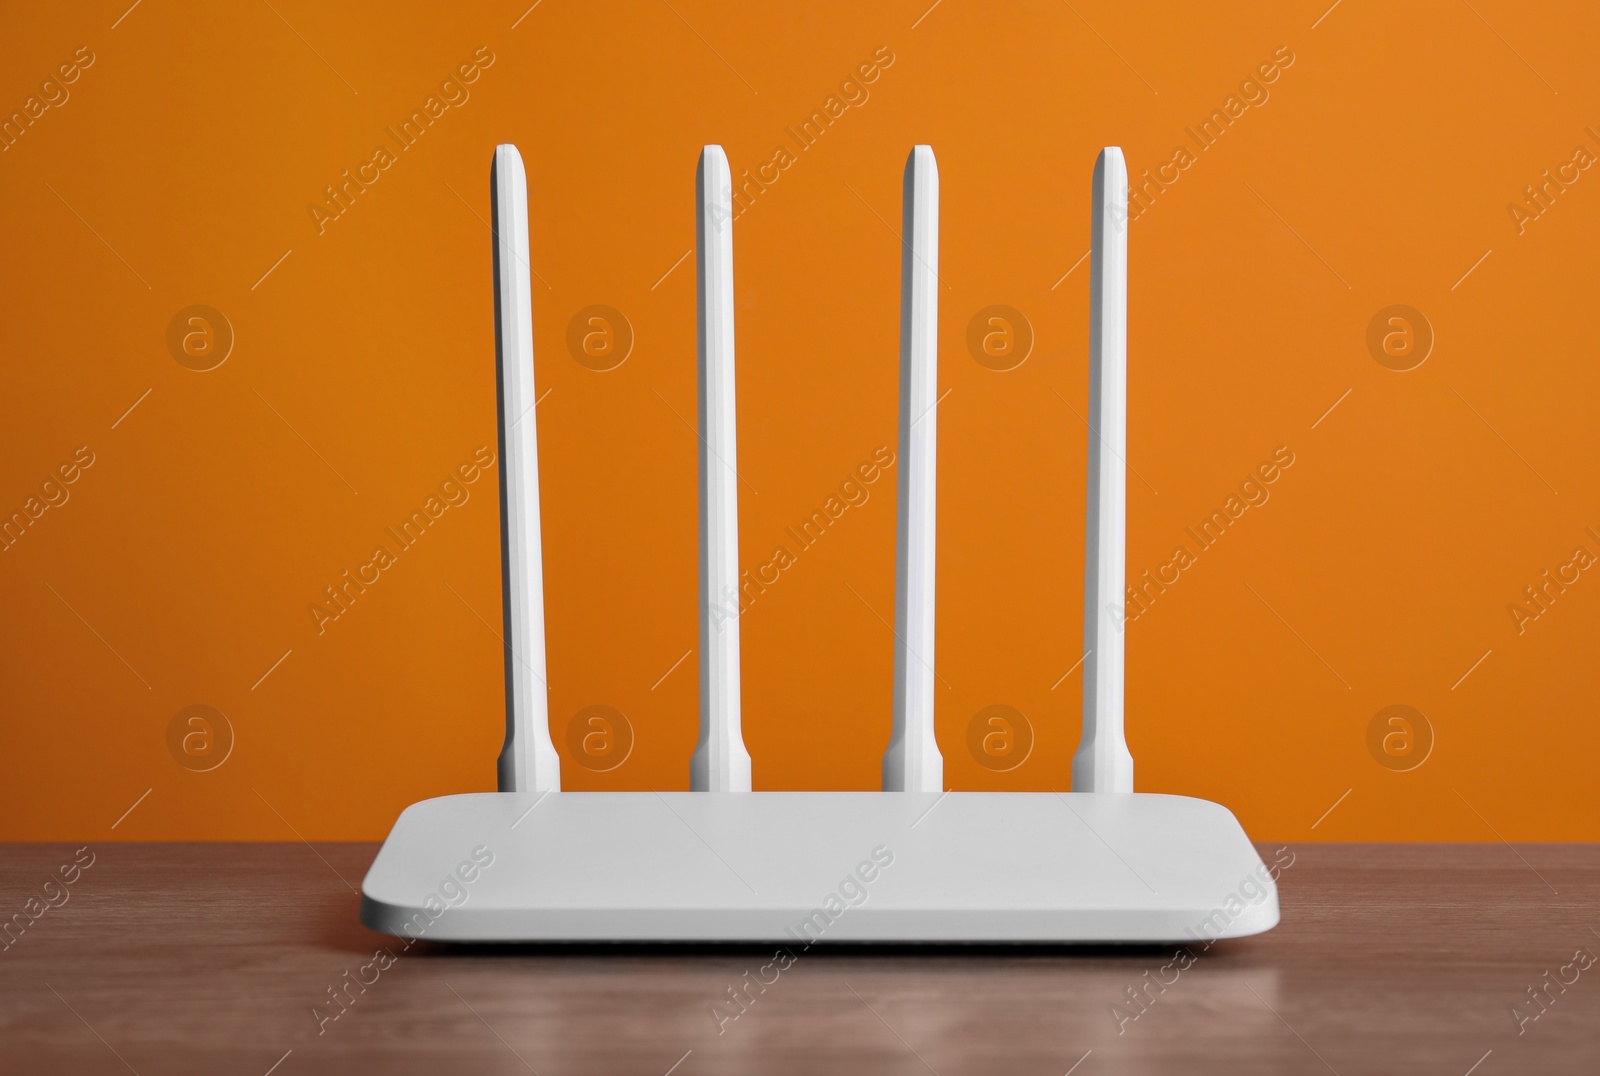 Photo of New modern Wi-Fi router on wooden table near orange wall